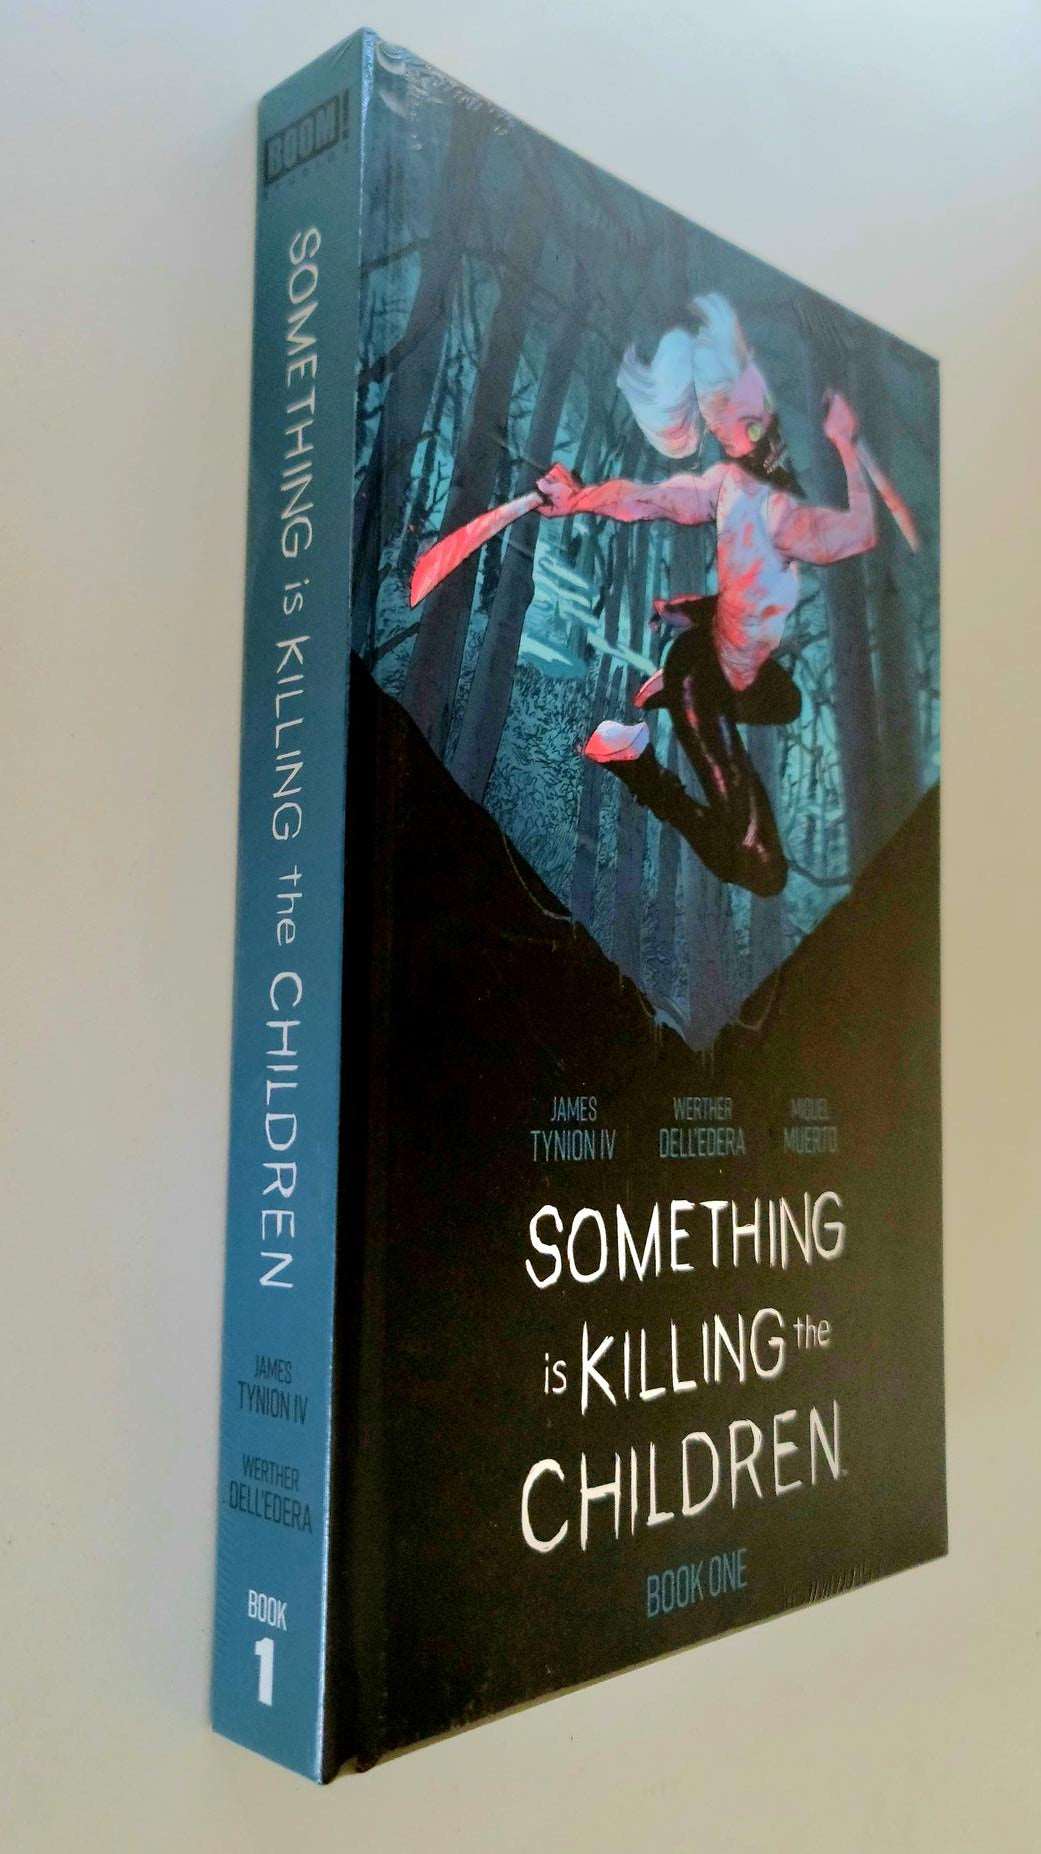 Something is Killing the Children: Book One, Deluxe Edition Hardcover, Sealed